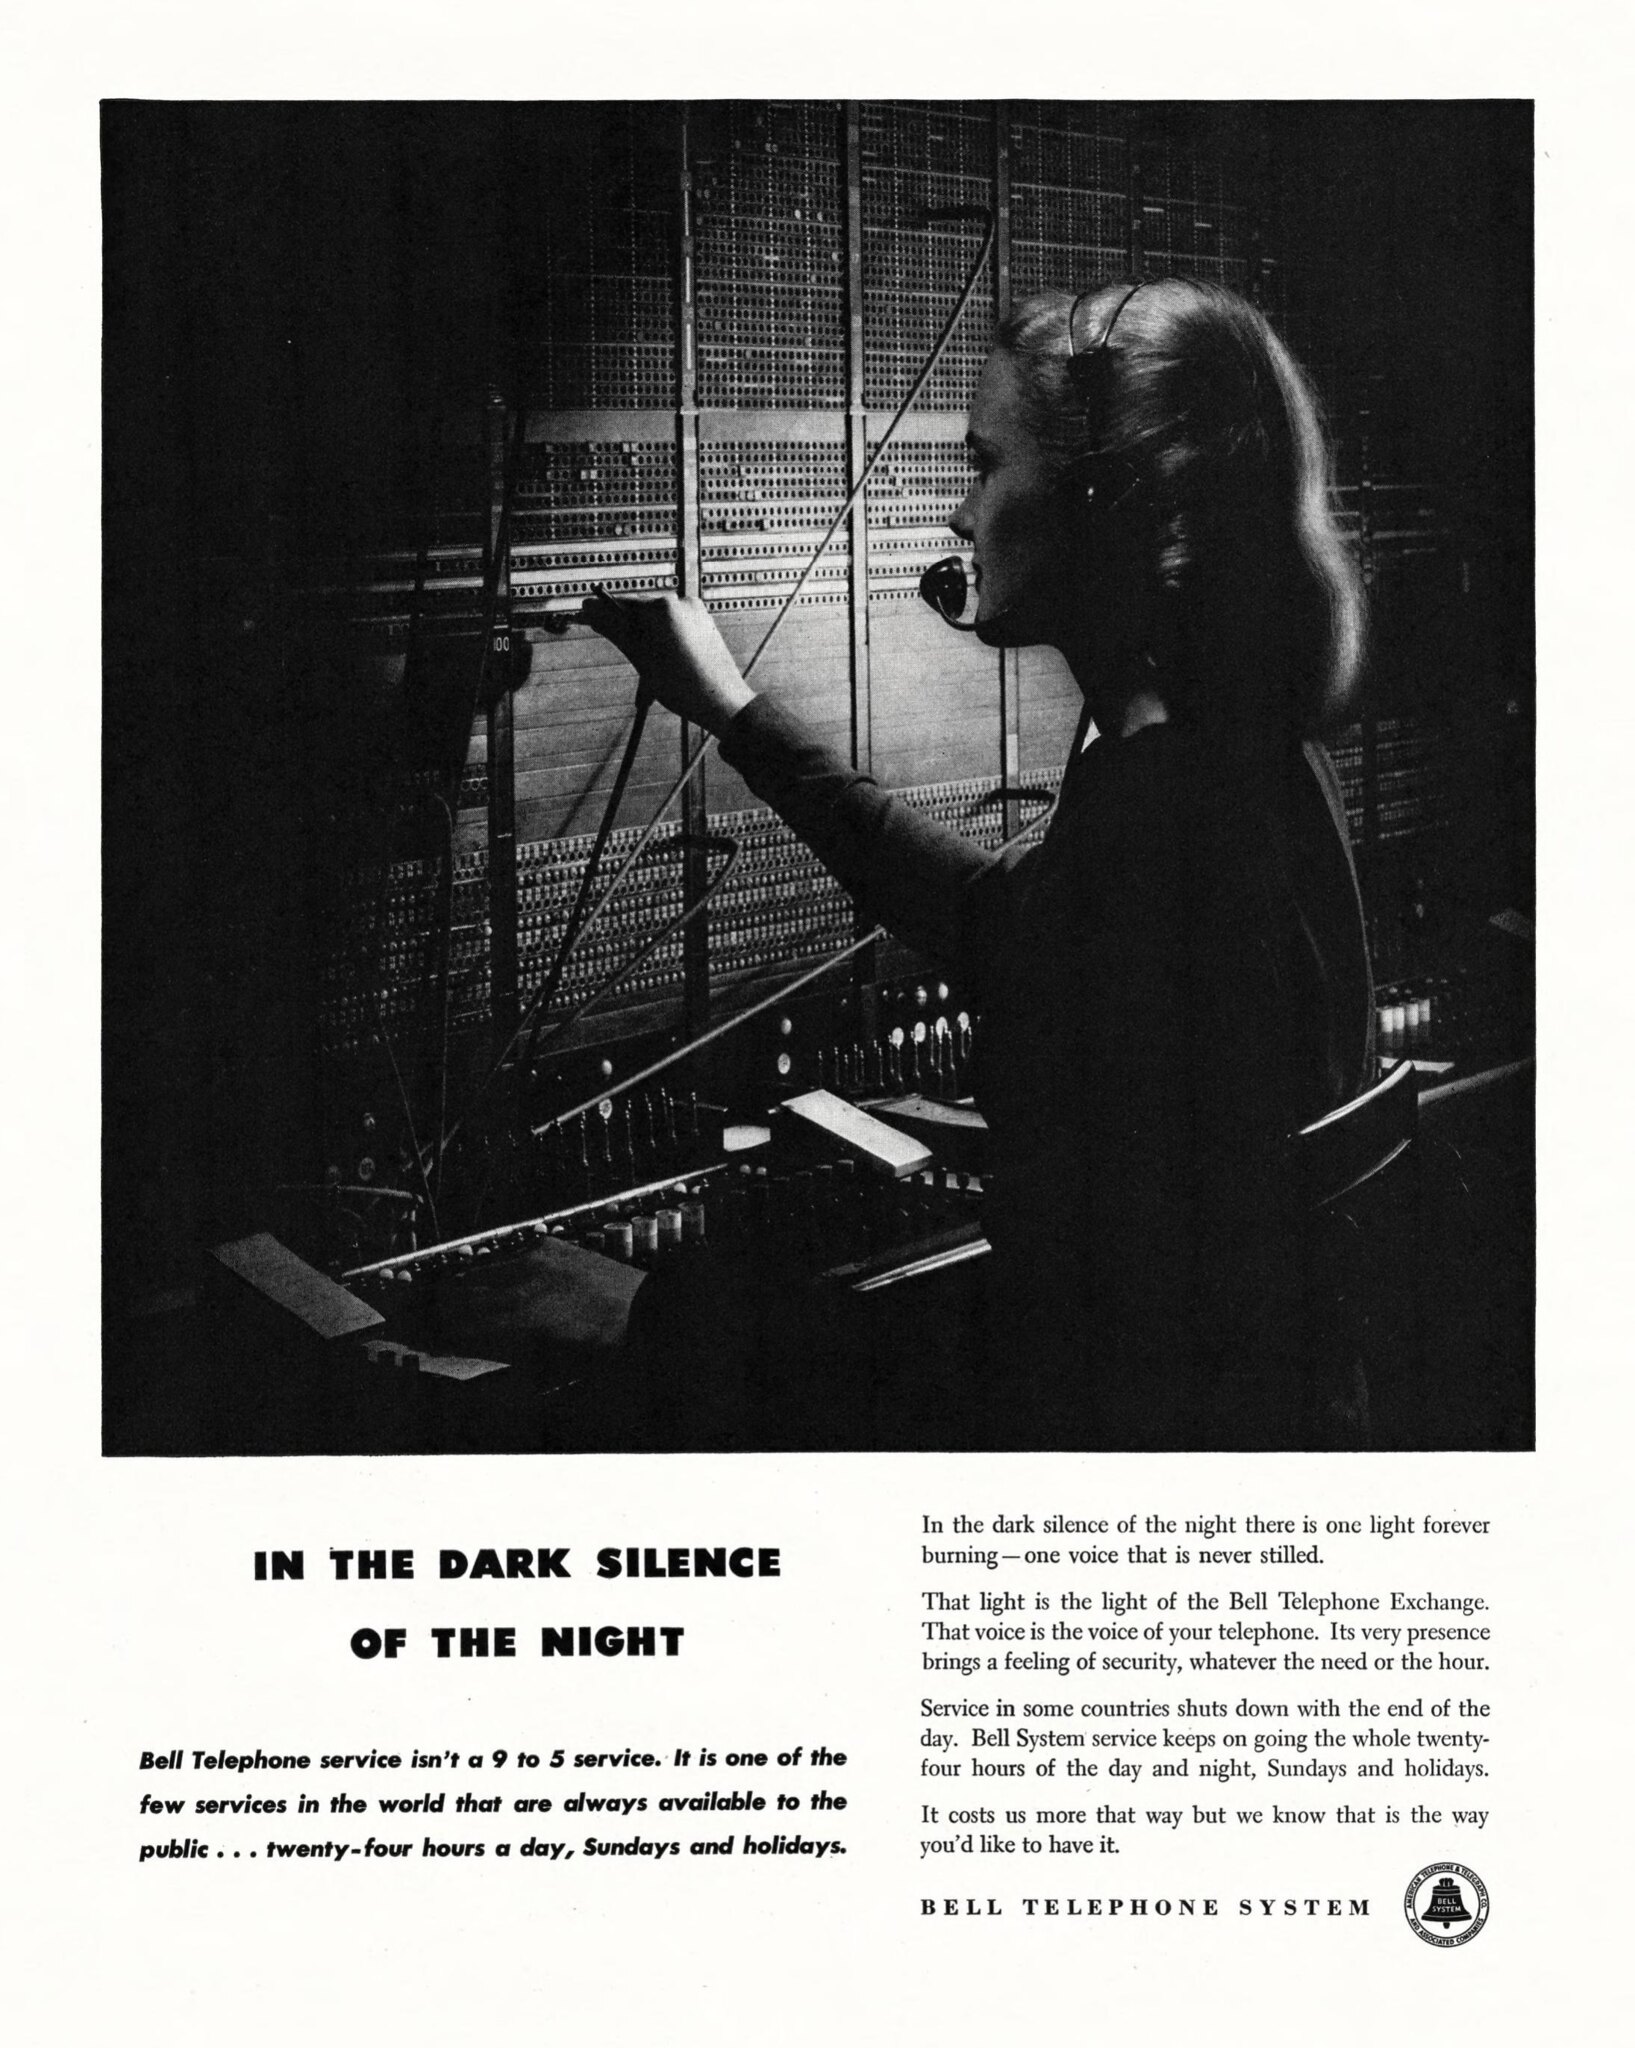 Bell Telephone System - published in Collier's (Vol. 120, No. 25) - December 20, 1947